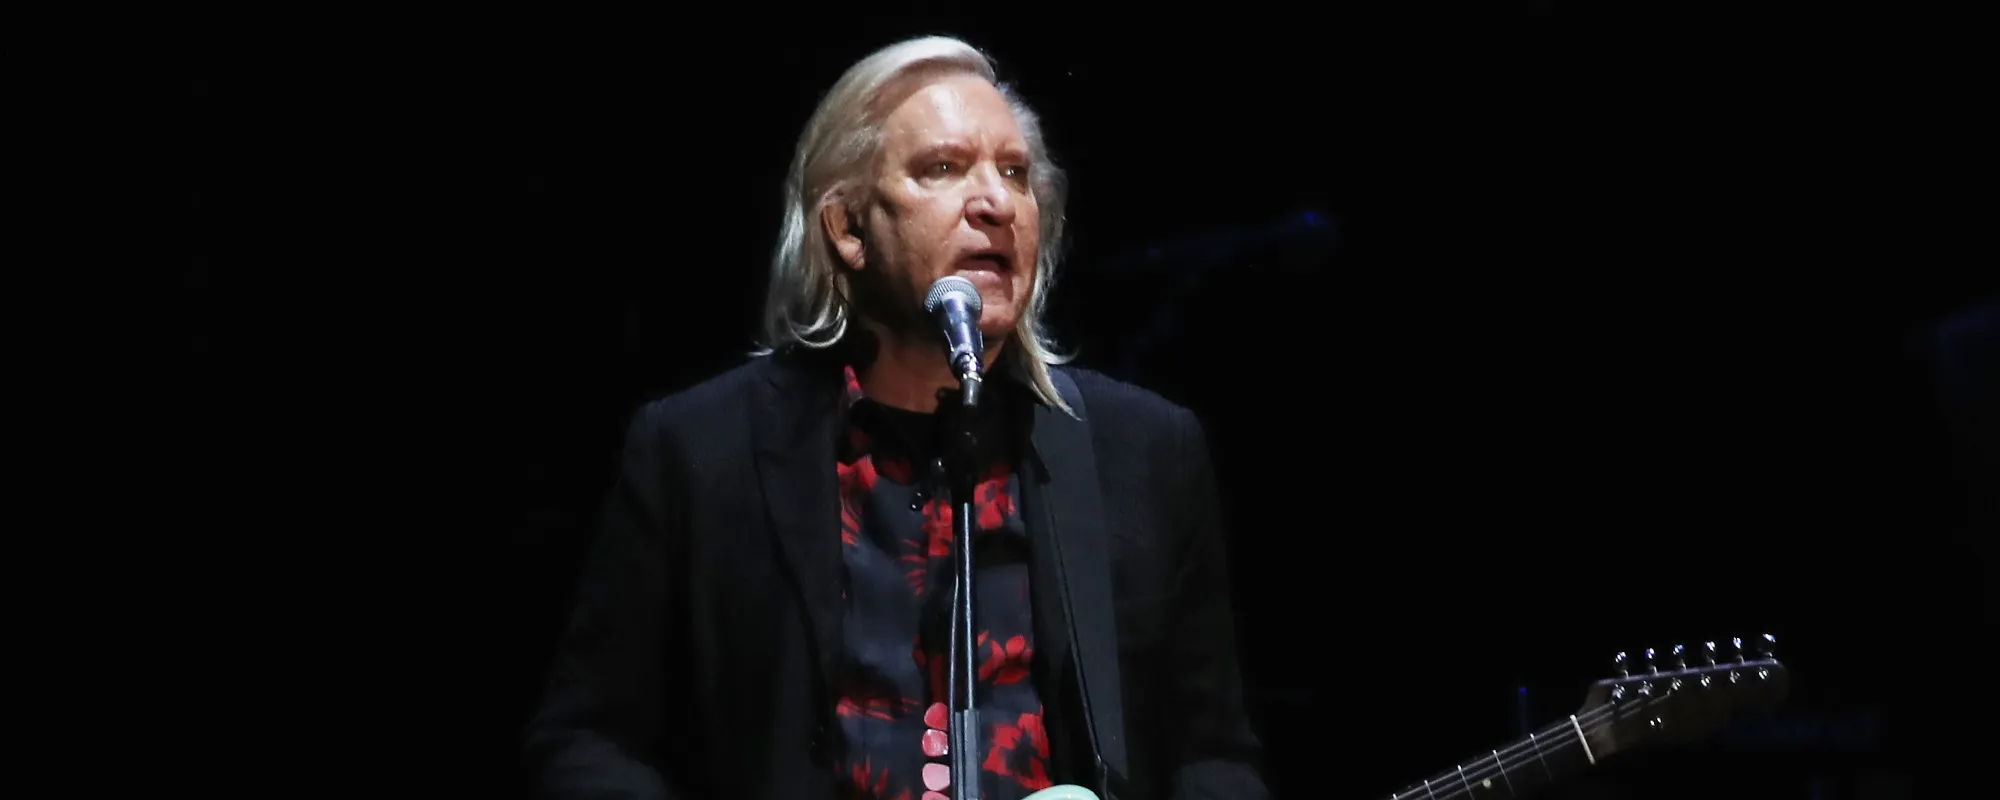 5 Joe Walsh Songs That Demonstrate His Musicianship and Songwriting